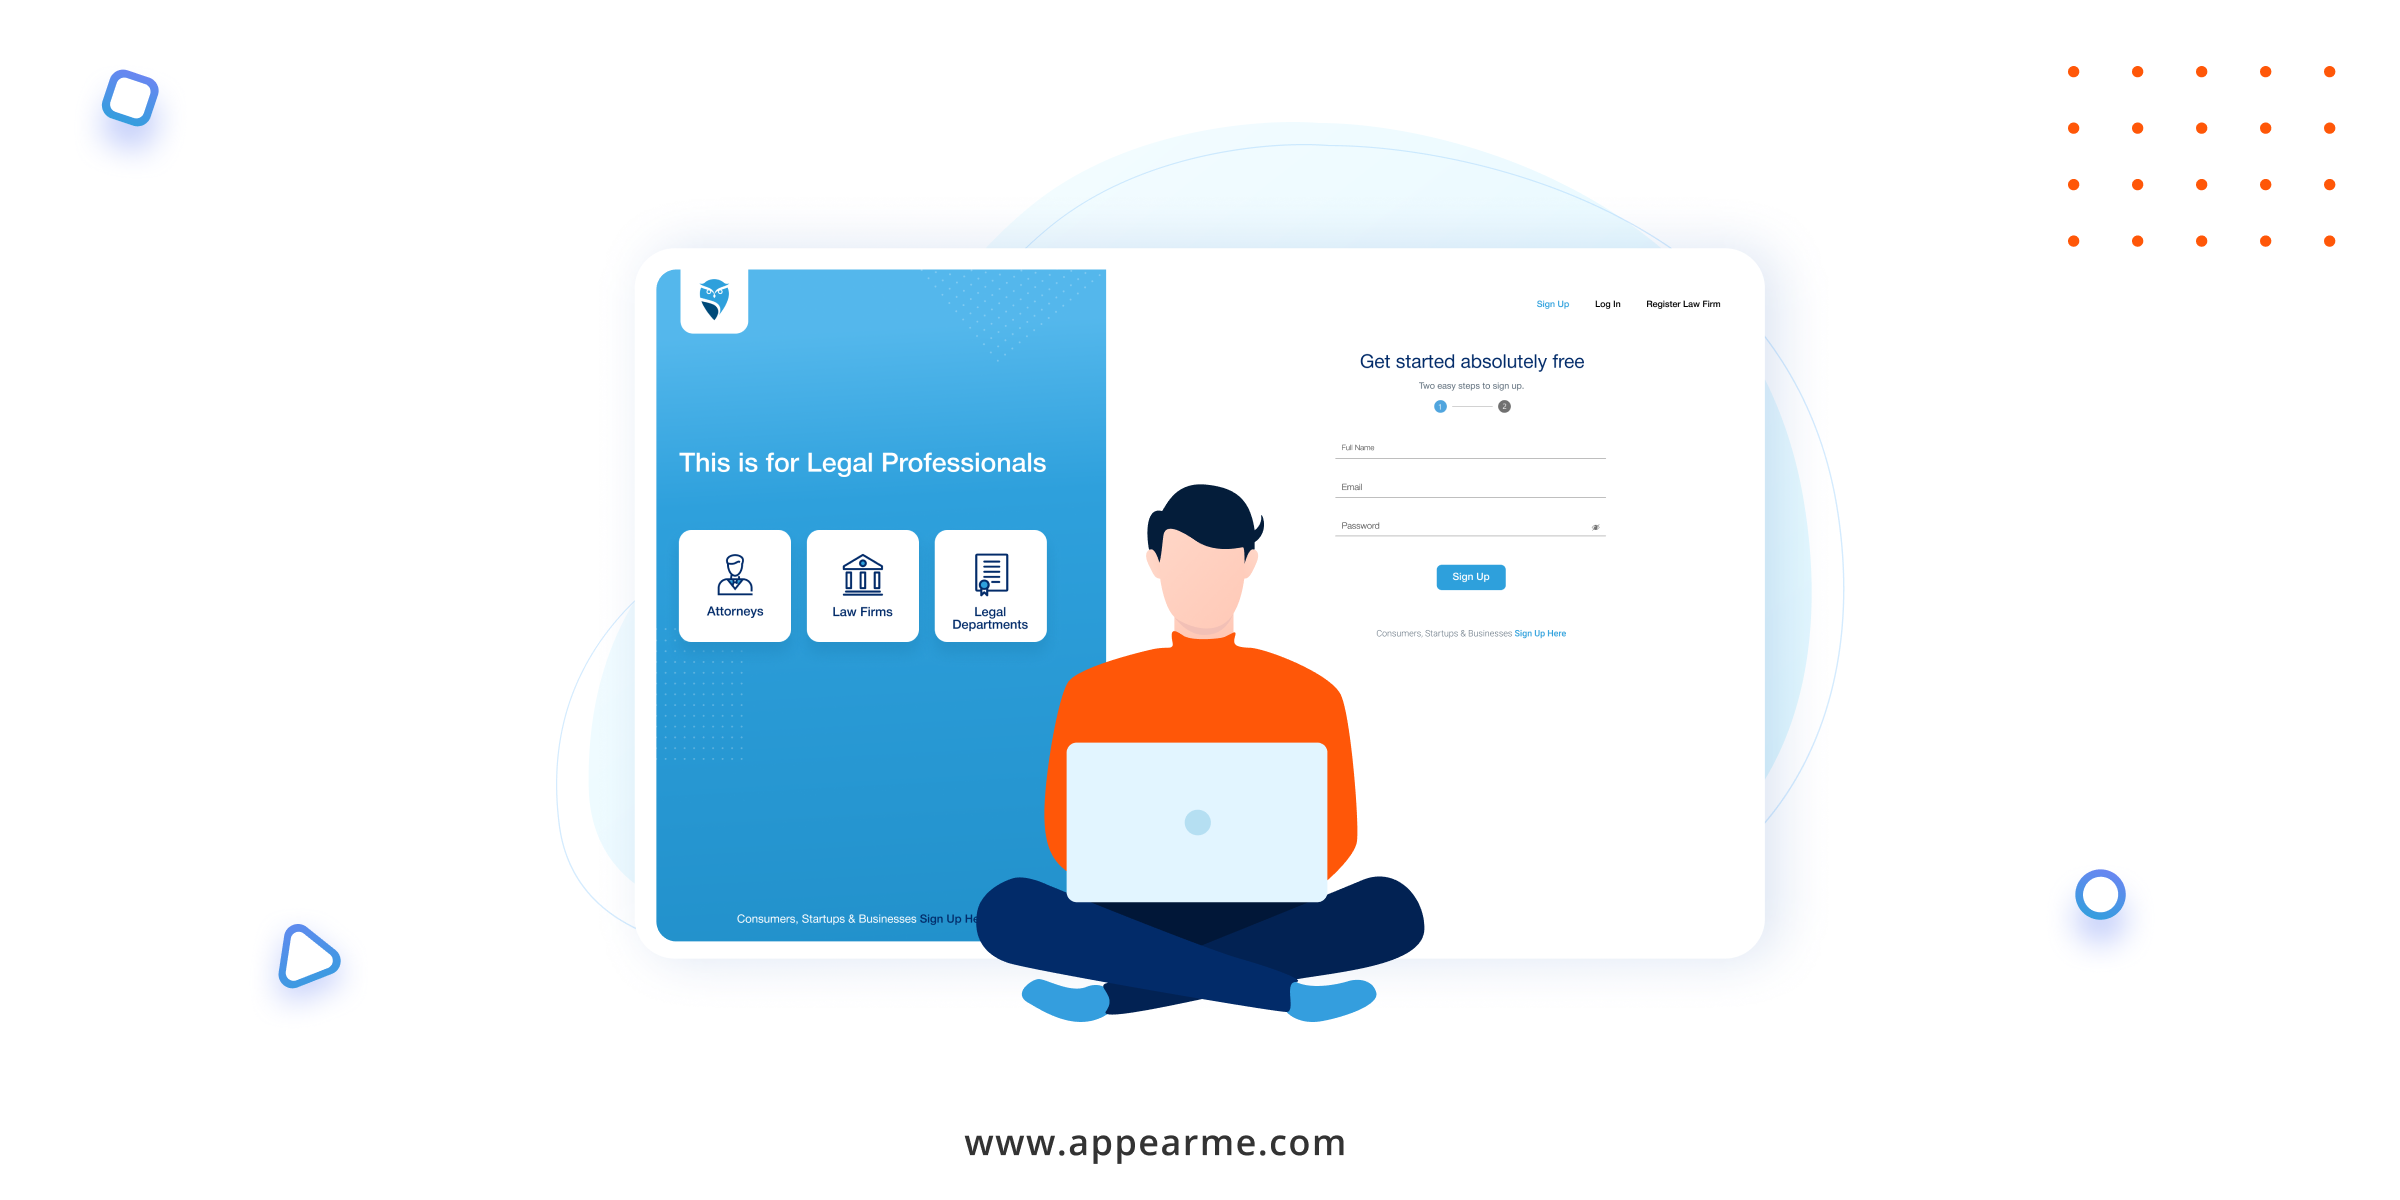 Delegate Your Legal Work to Freelance Lawyers